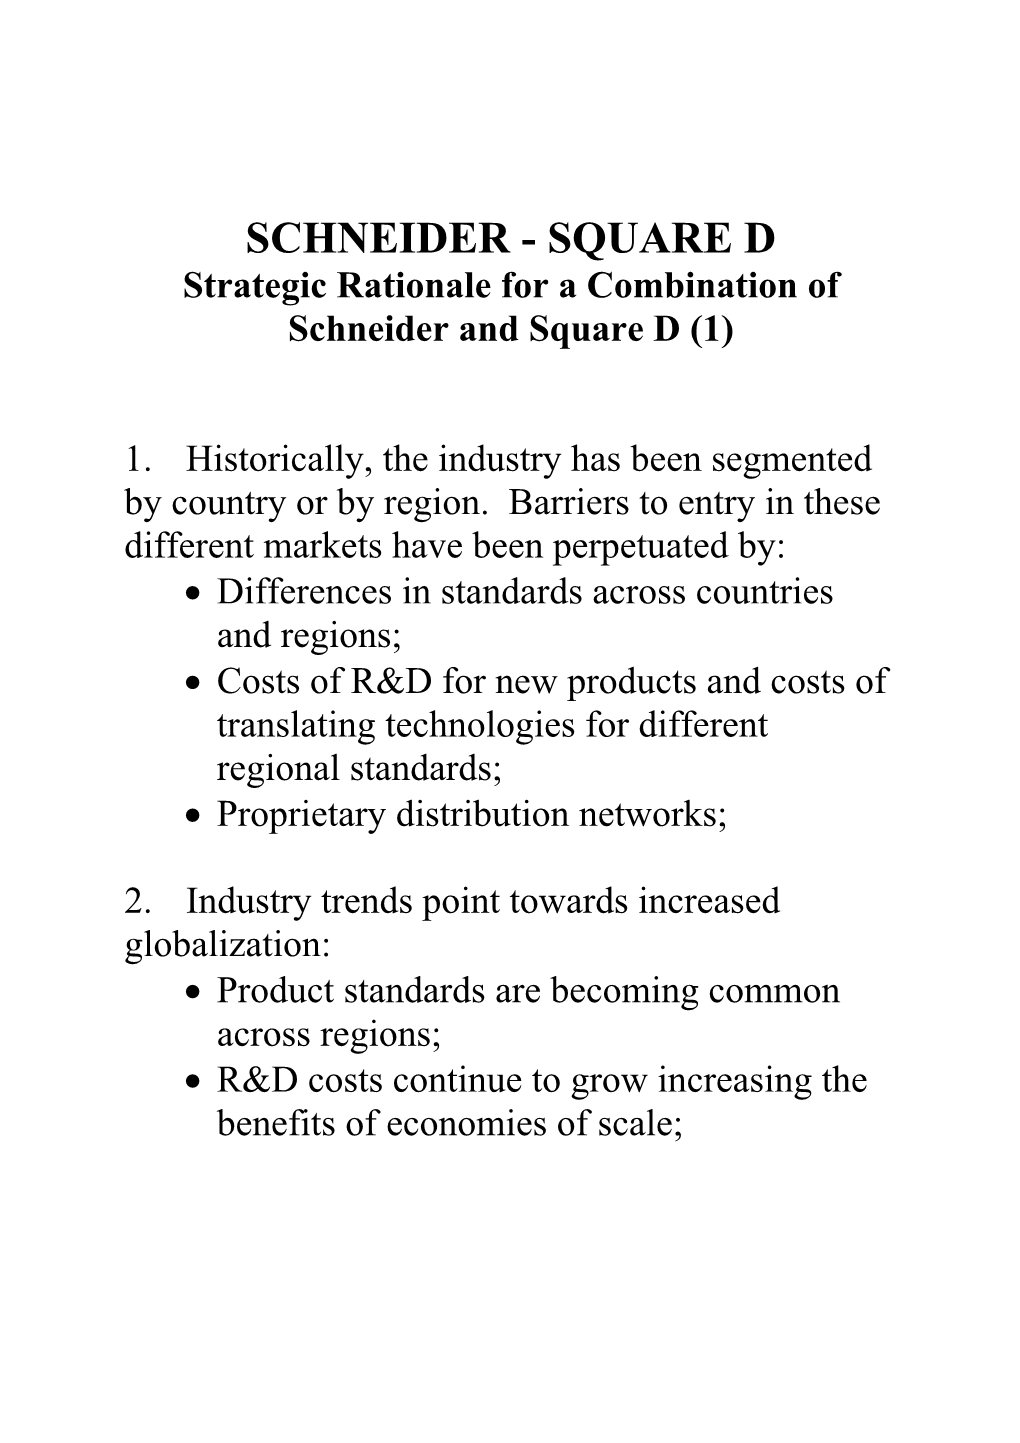 Strategic Rationale for a Combination of Schneider and Square D (1)